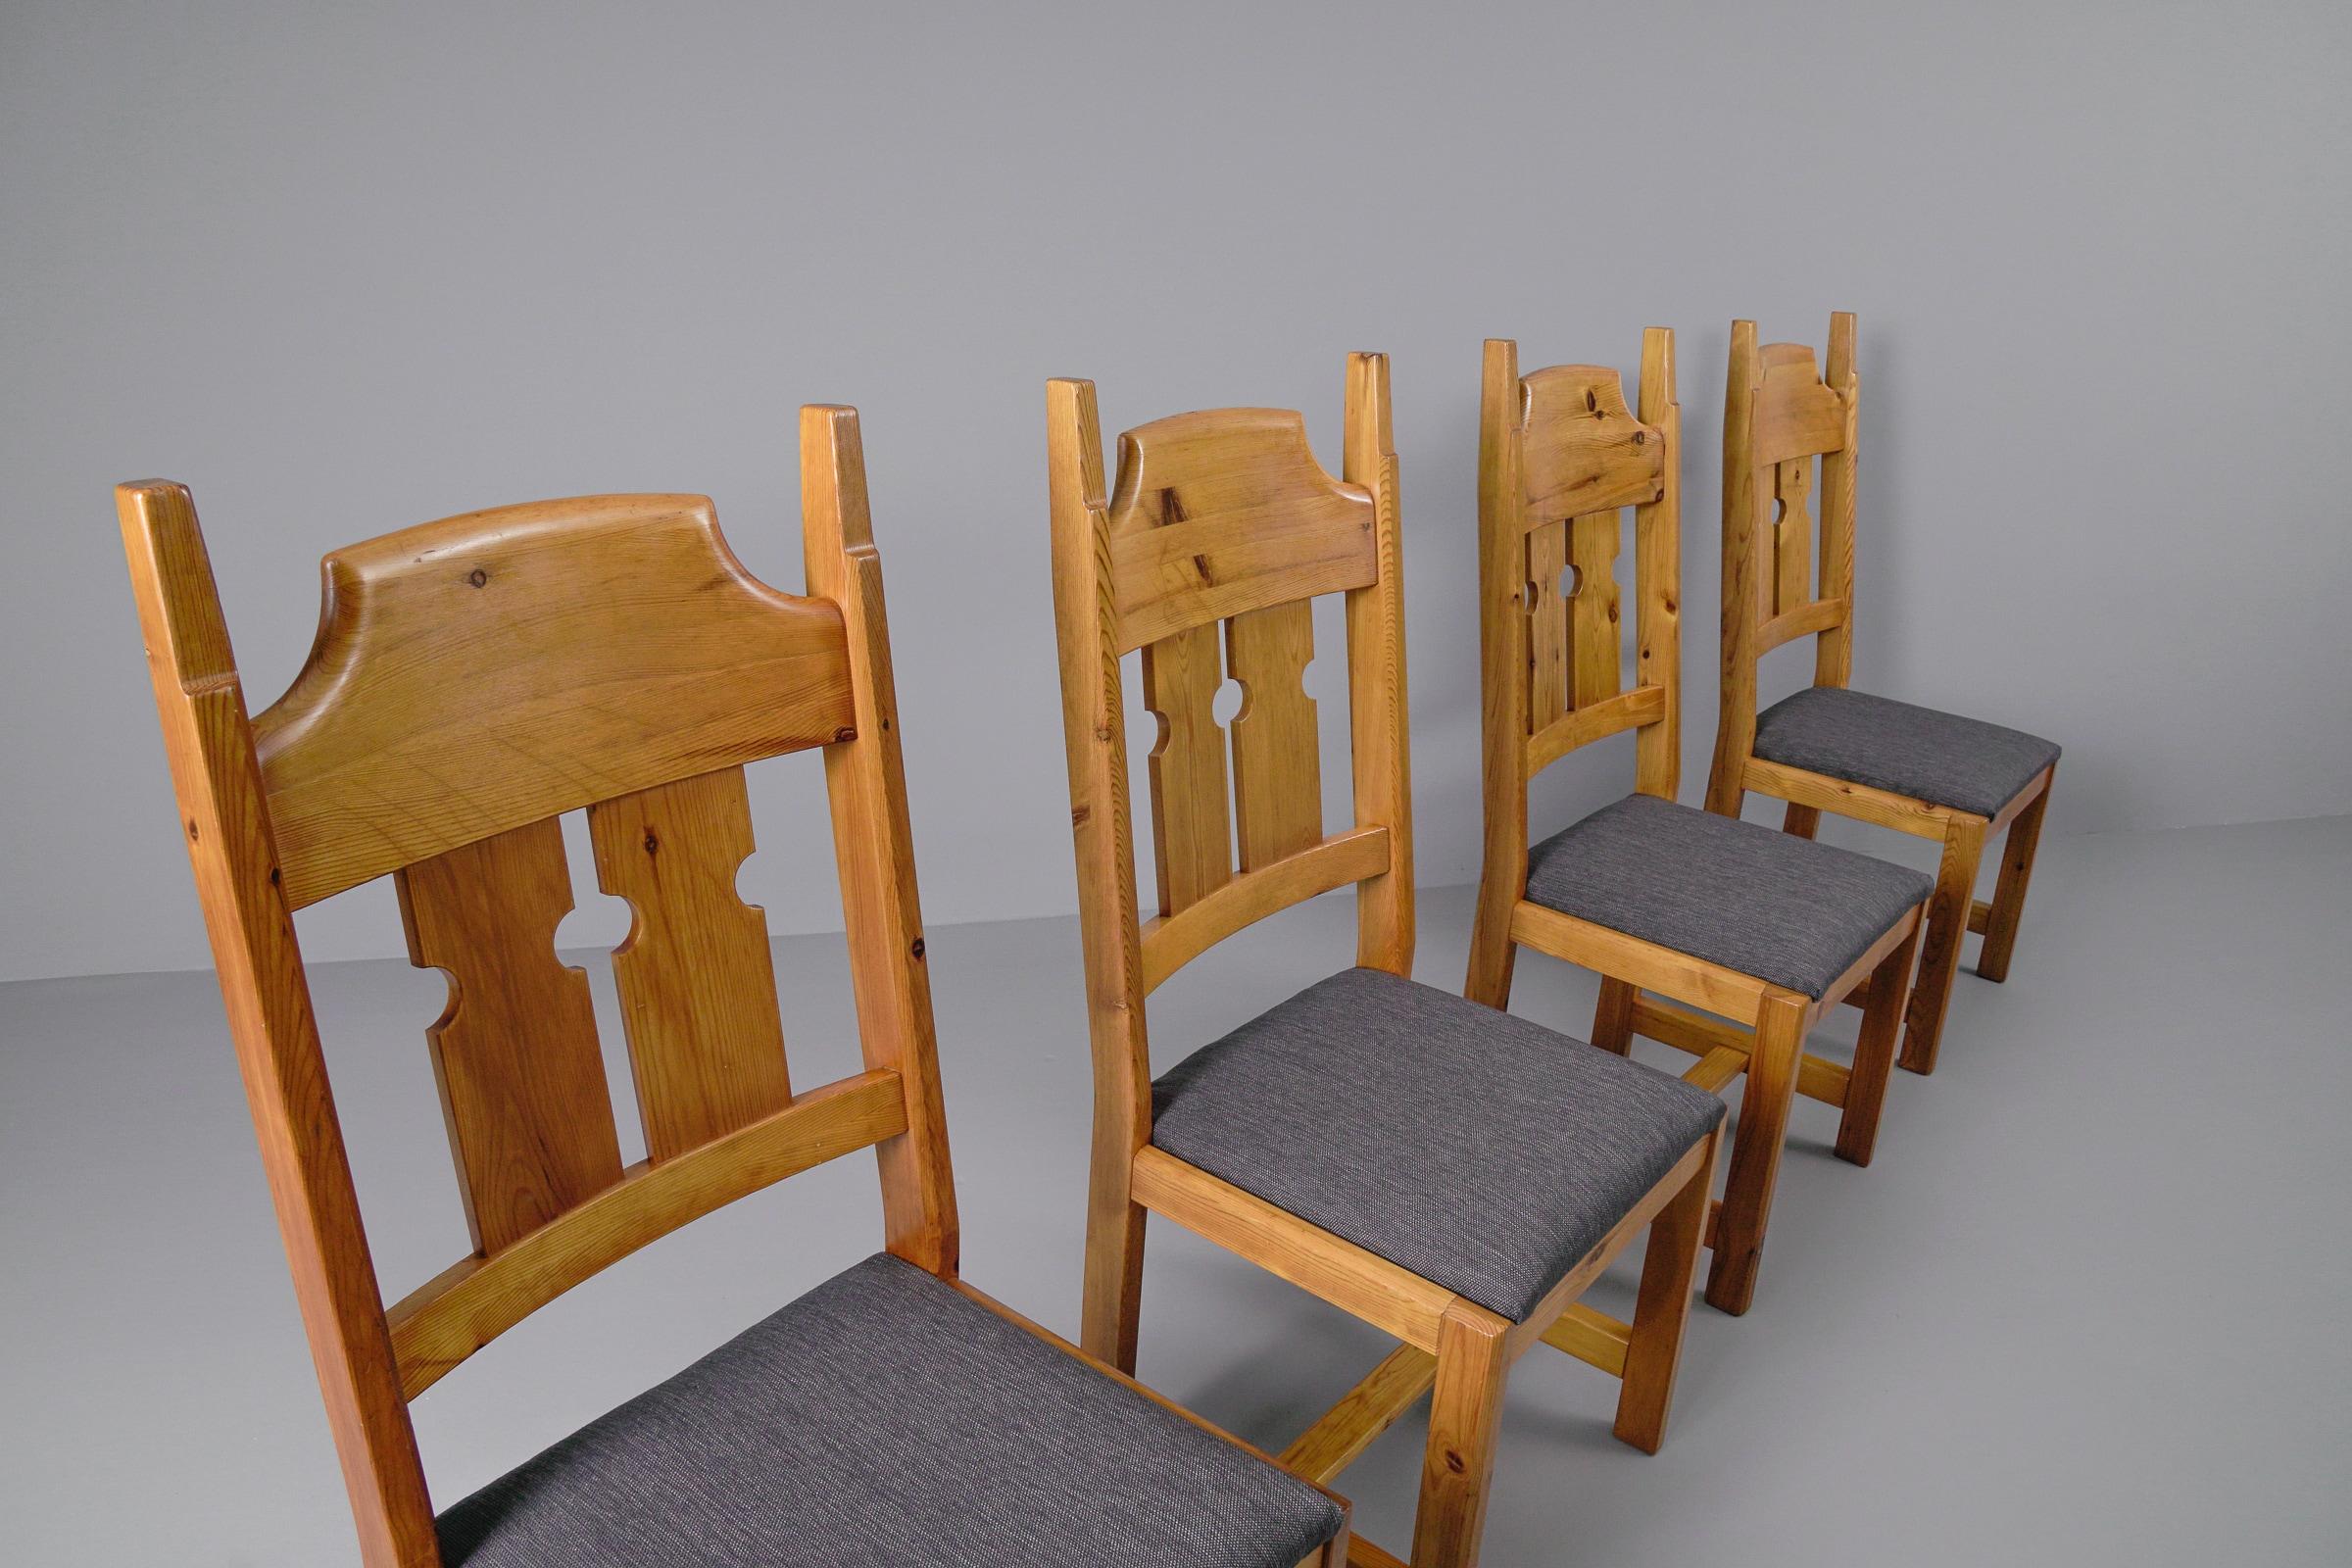 Fabric  Set of 4 Swedish Pine Chairs by Gilbert Marklund for Furusnickarn AB, 1970s For Sale